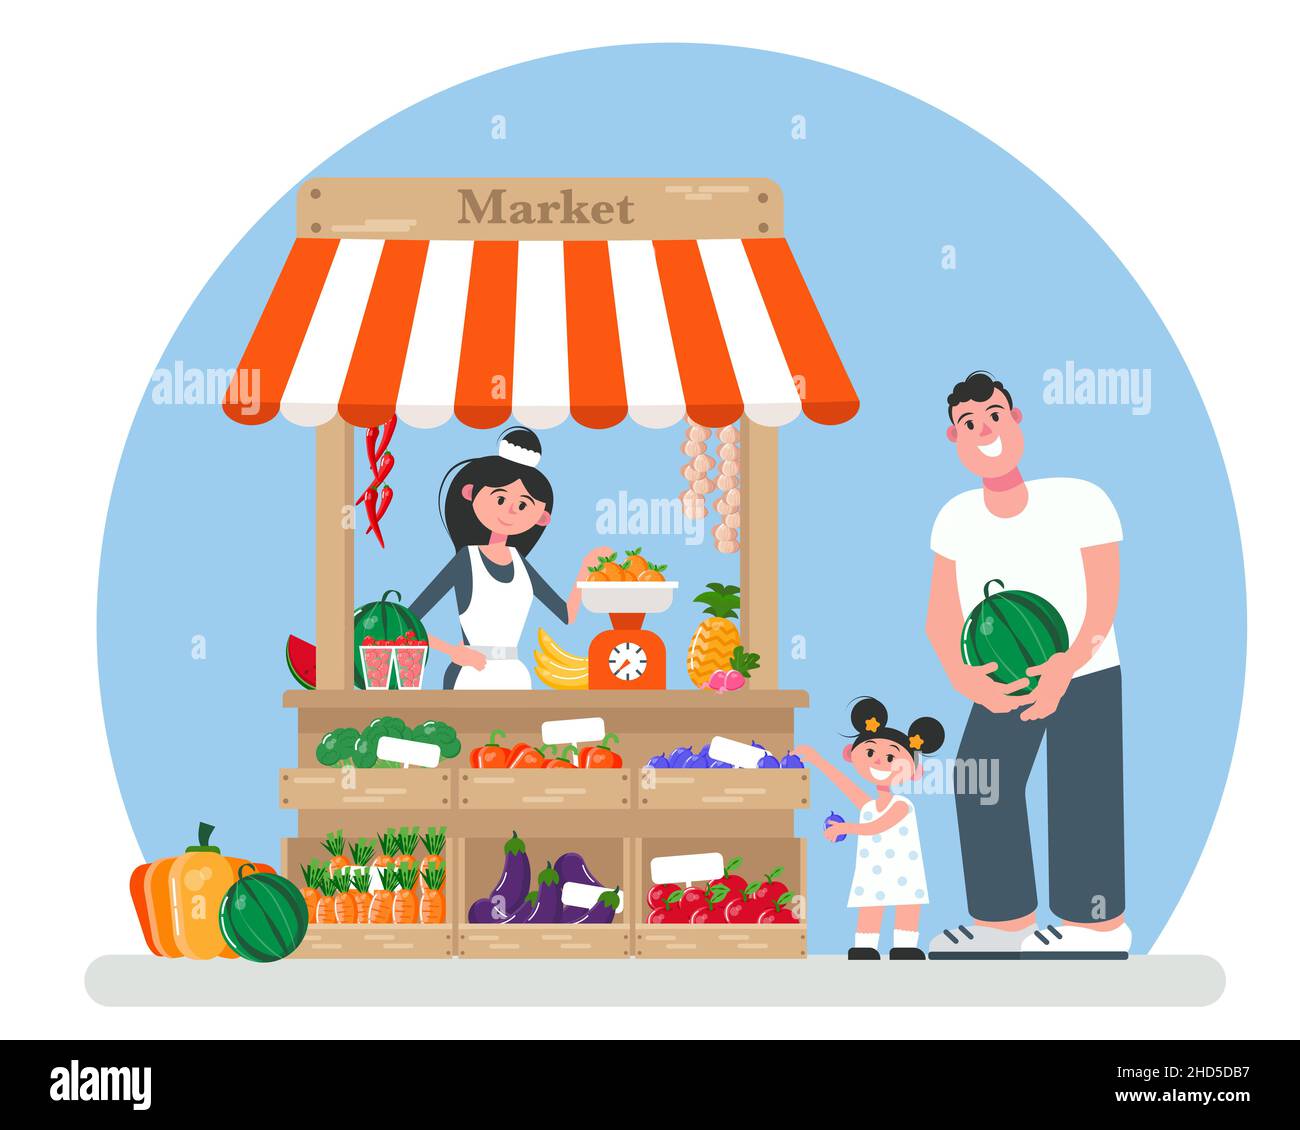 Fresh vegetables and fruits market with the seller. Dad and daughter are buying groceries. Vector illustration in a flat style. Stock Vector